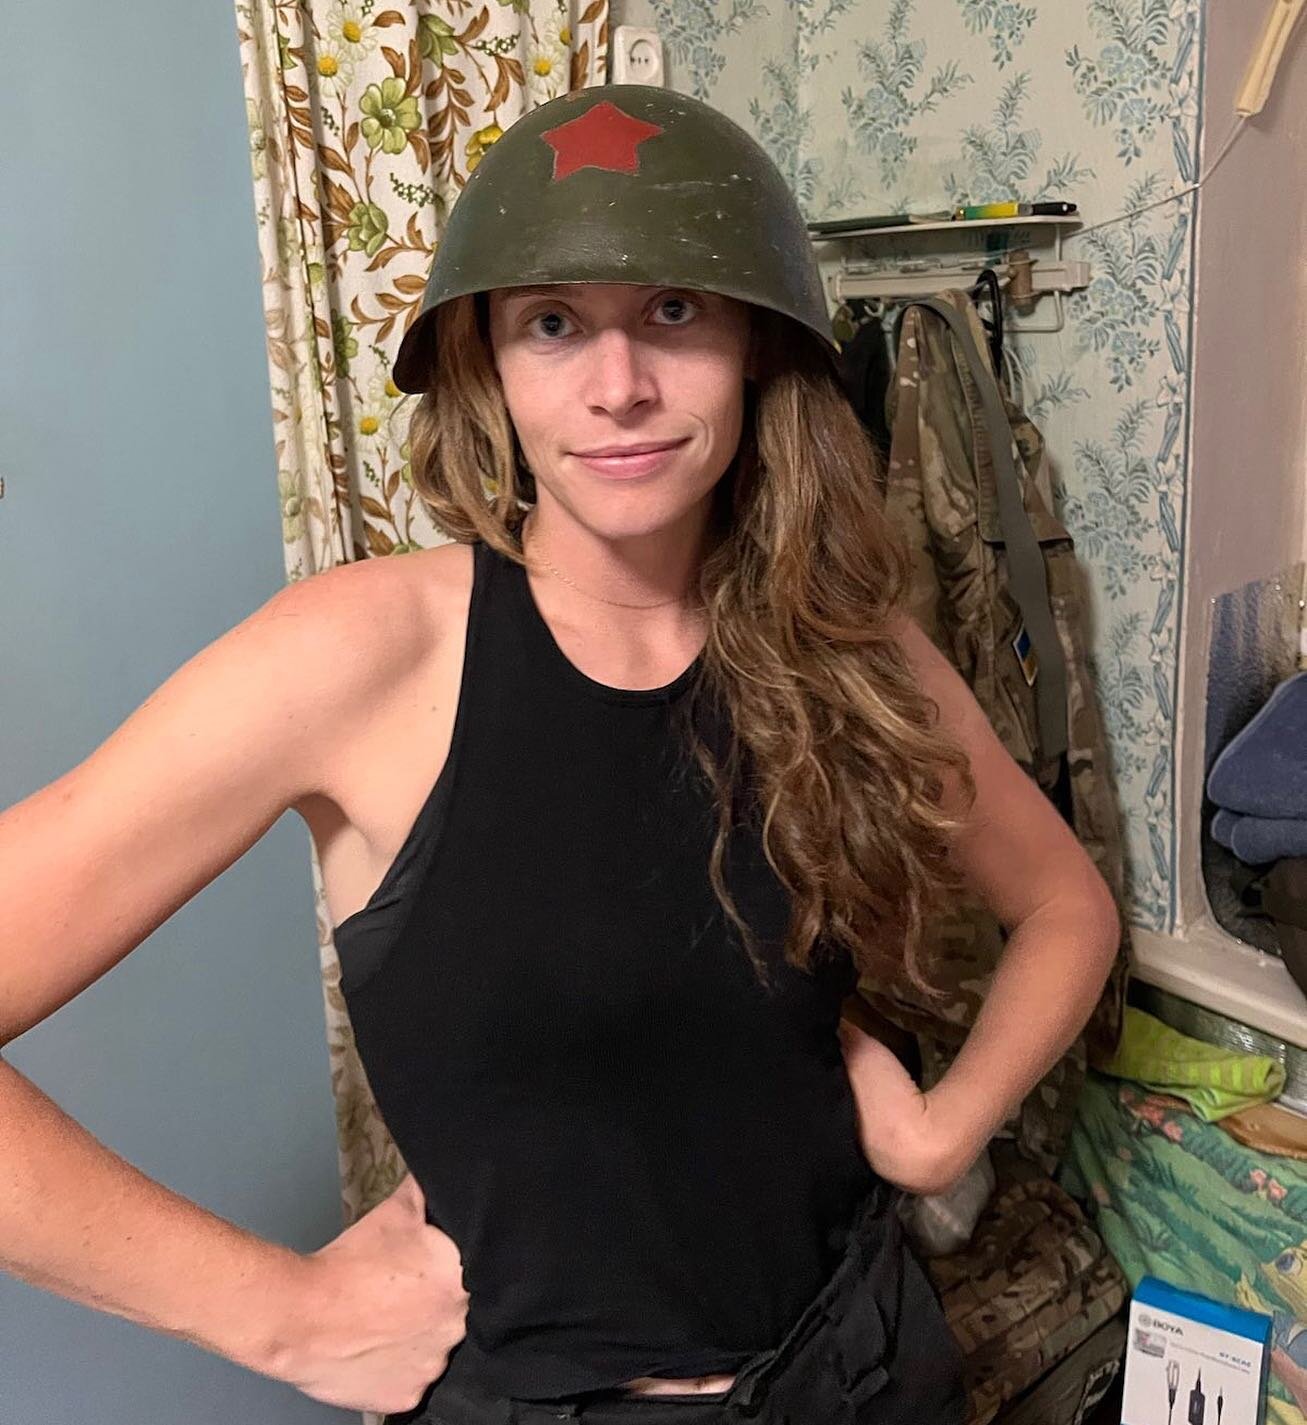 Thoughts on my new ballistic helmet?

A dear soldier brought me a WWII Red Army helmet he found on the front in southeastern Ukraine.

Perfect fit, right?